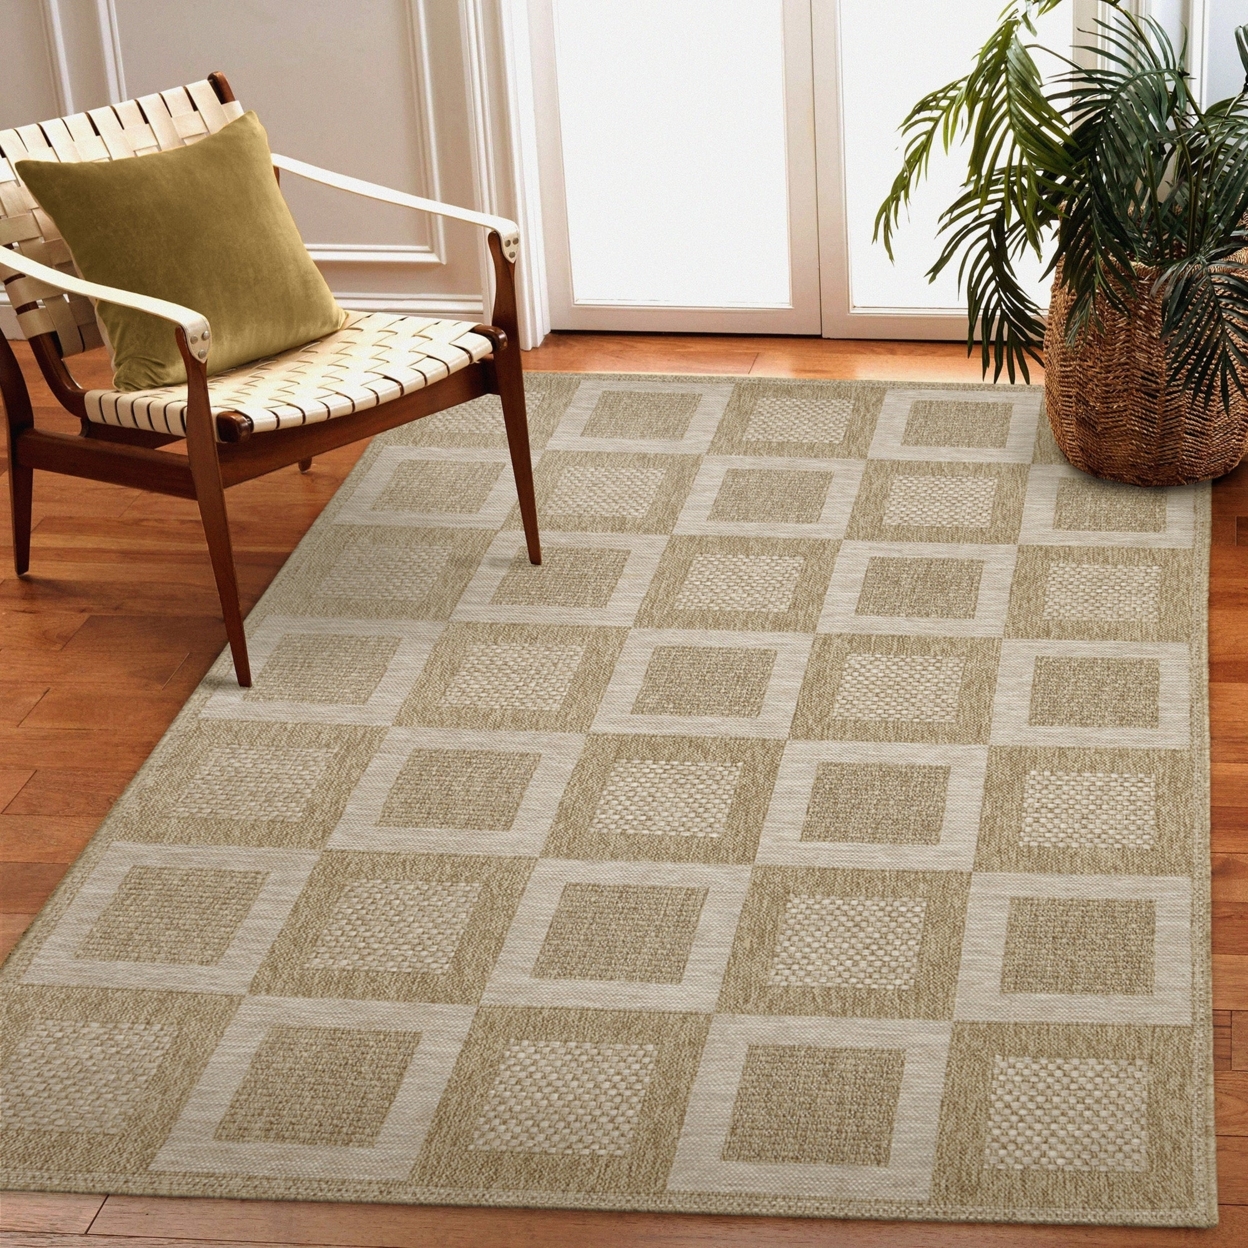 Liora Manne Orly Squares Indoor Outdoor Area Rug Natural - 6'6 X 9'3